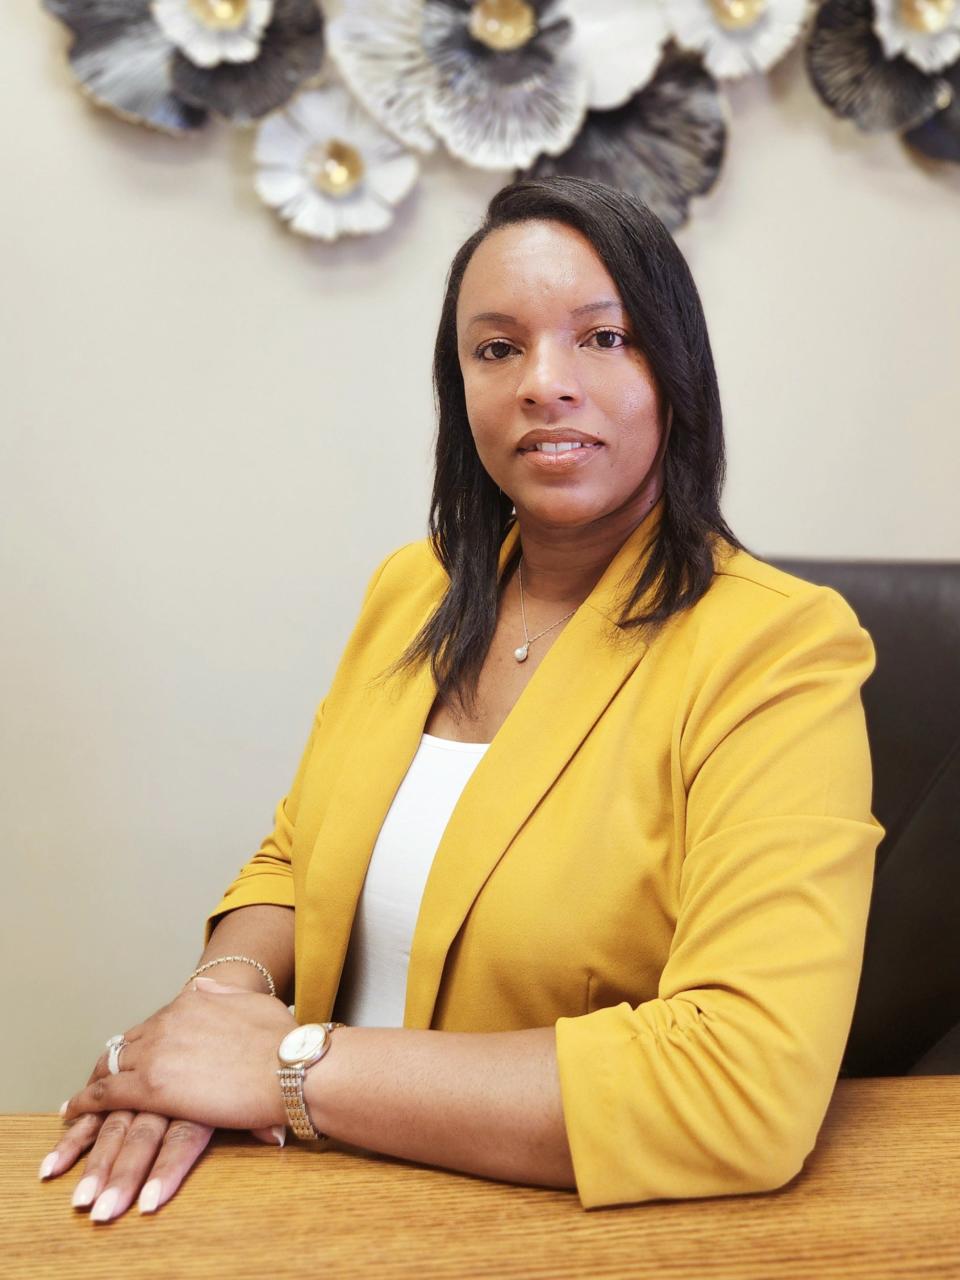 Felicia Lyons, executive director of Fort Smith nonprofit Chance to Change, has organized a new group called ARISE and they have an event to help people reenter society after being incarcerated.